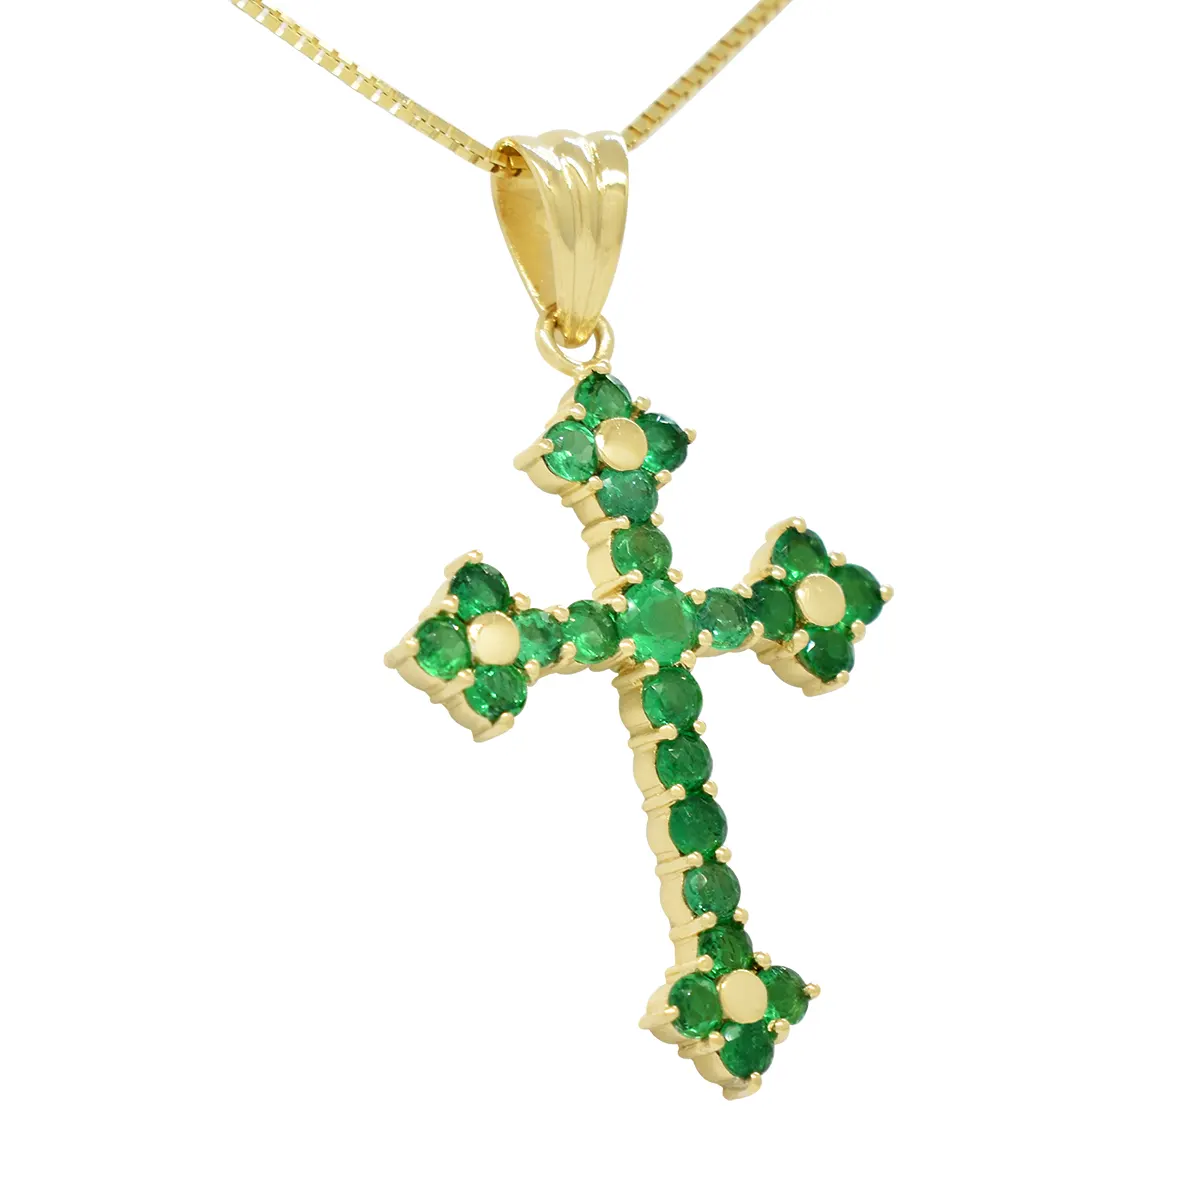 Cross Emerald Pendant in 18K Yellow Gold with 24 Round Cut Emeralds